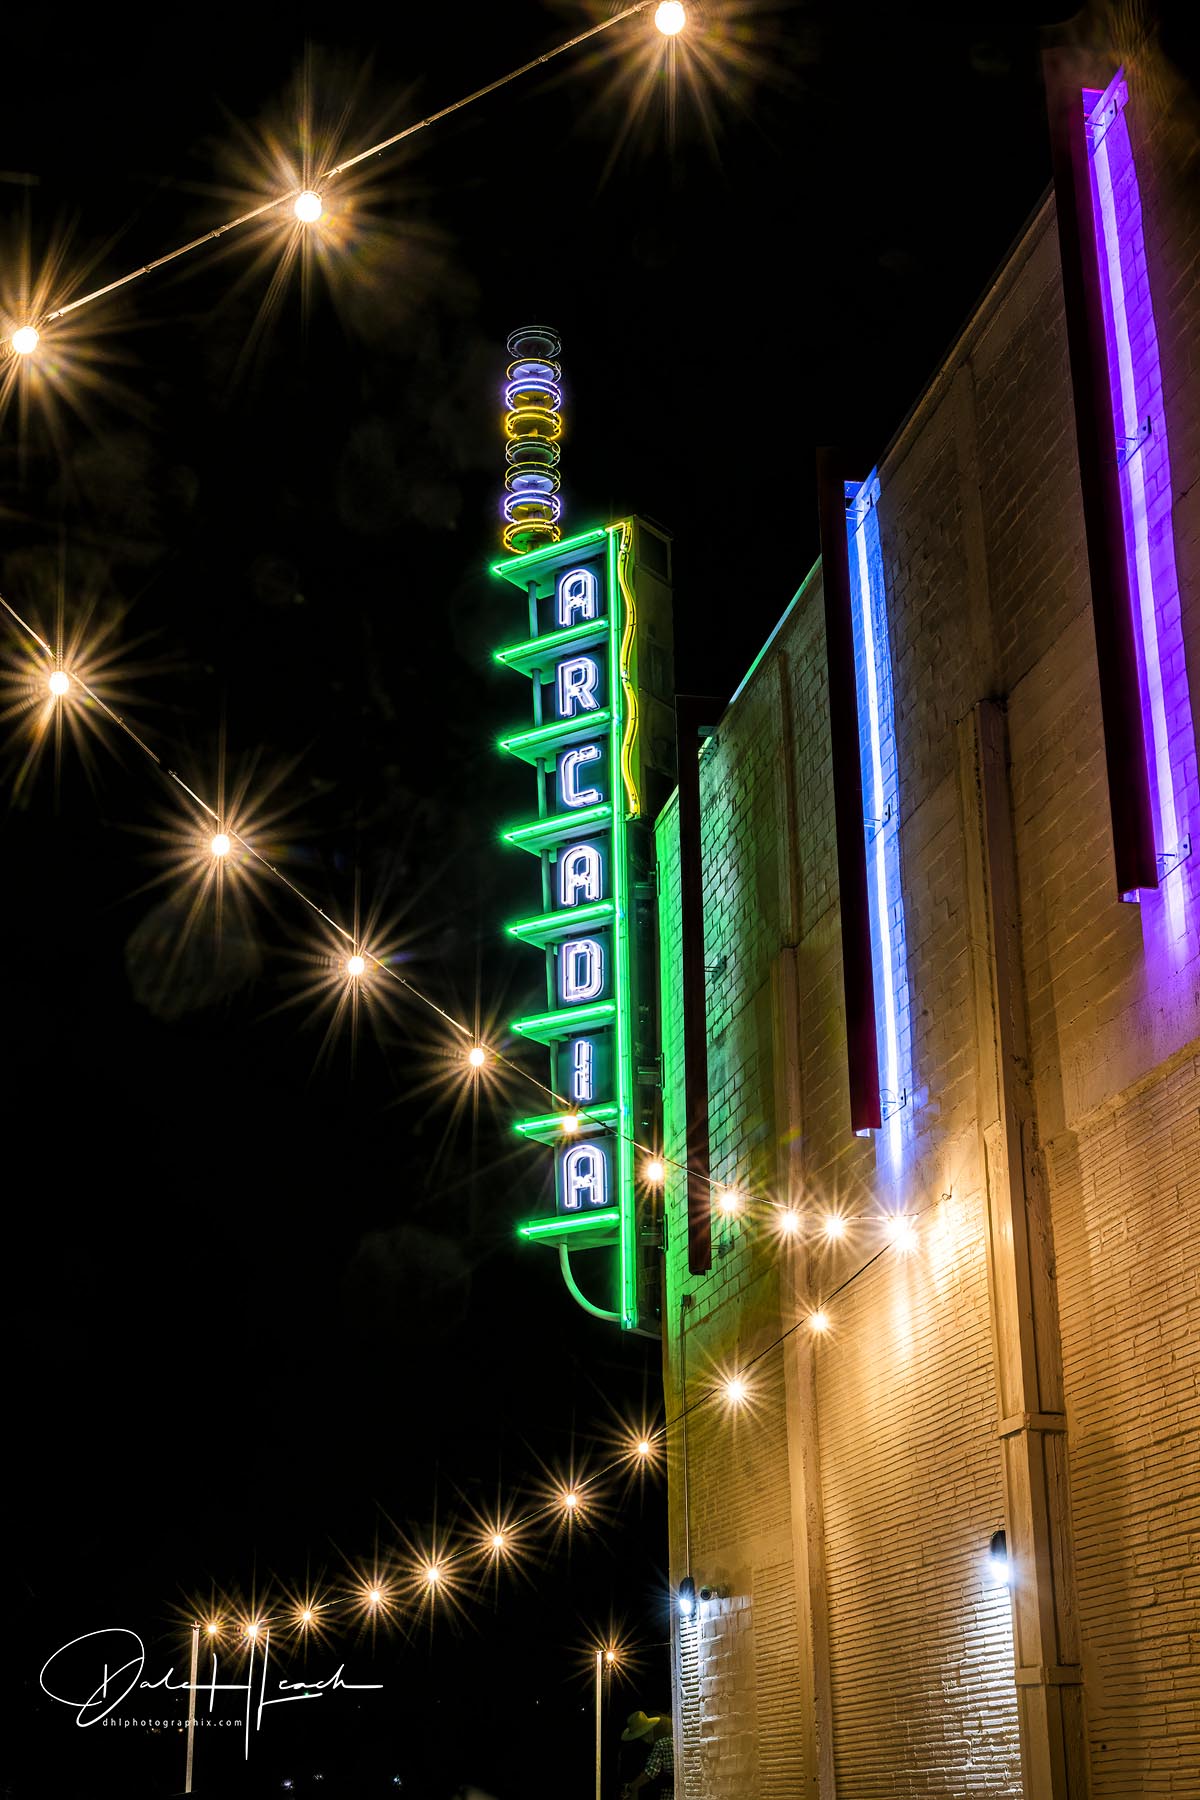 Neon vertical theater sign, "Arcadia," lit up in green and yellow at night